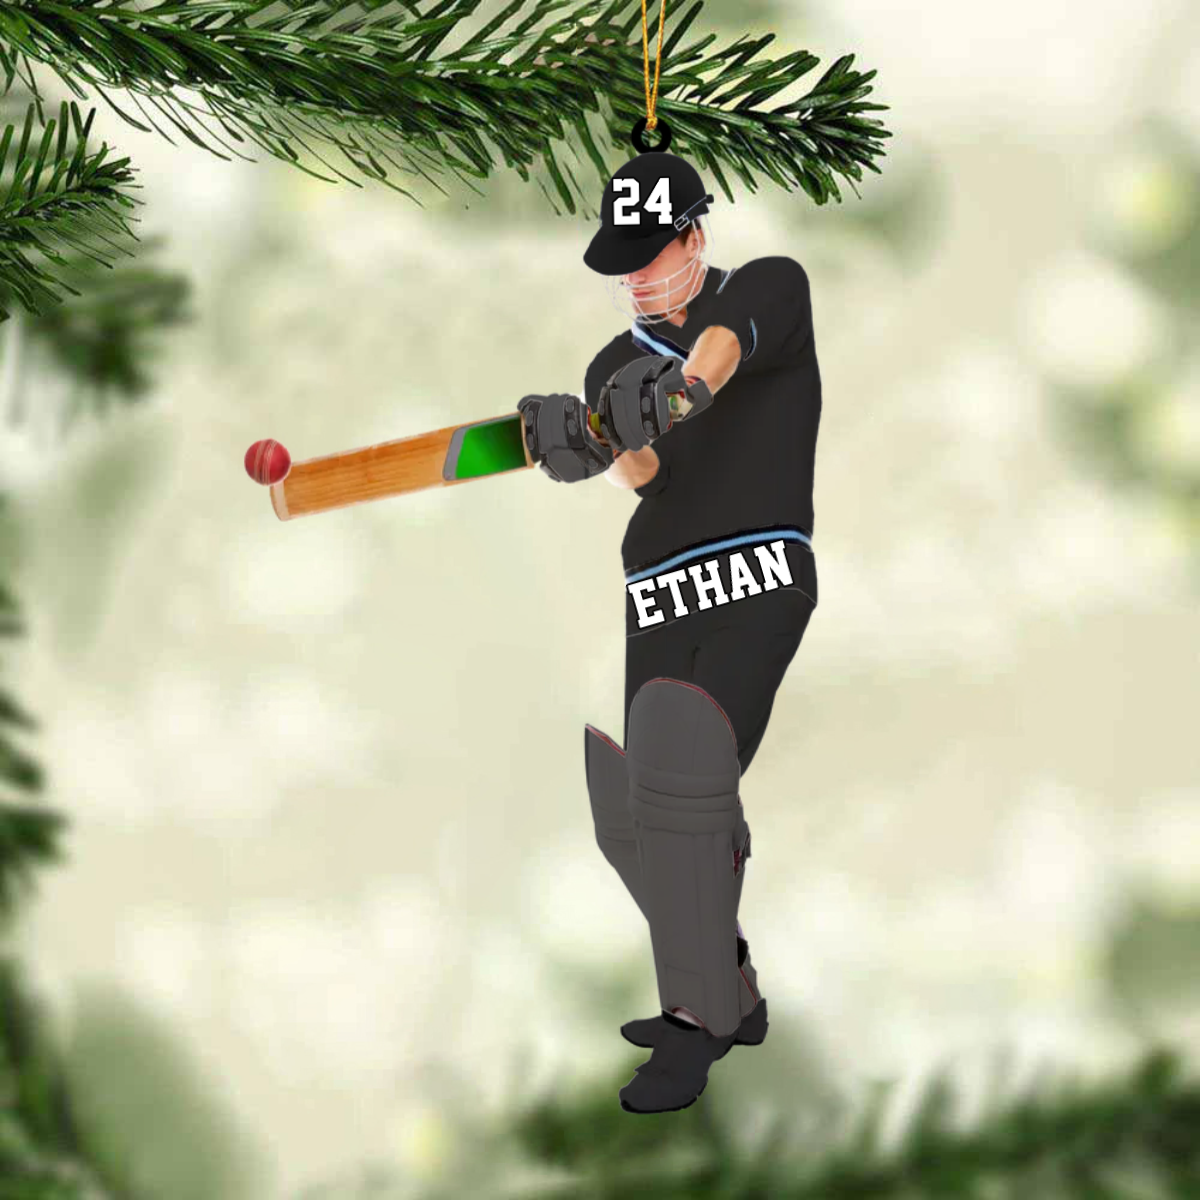 Personalized Cricket player Christmas Ornament-Great Gift Idea For Cricket Lovers/Players